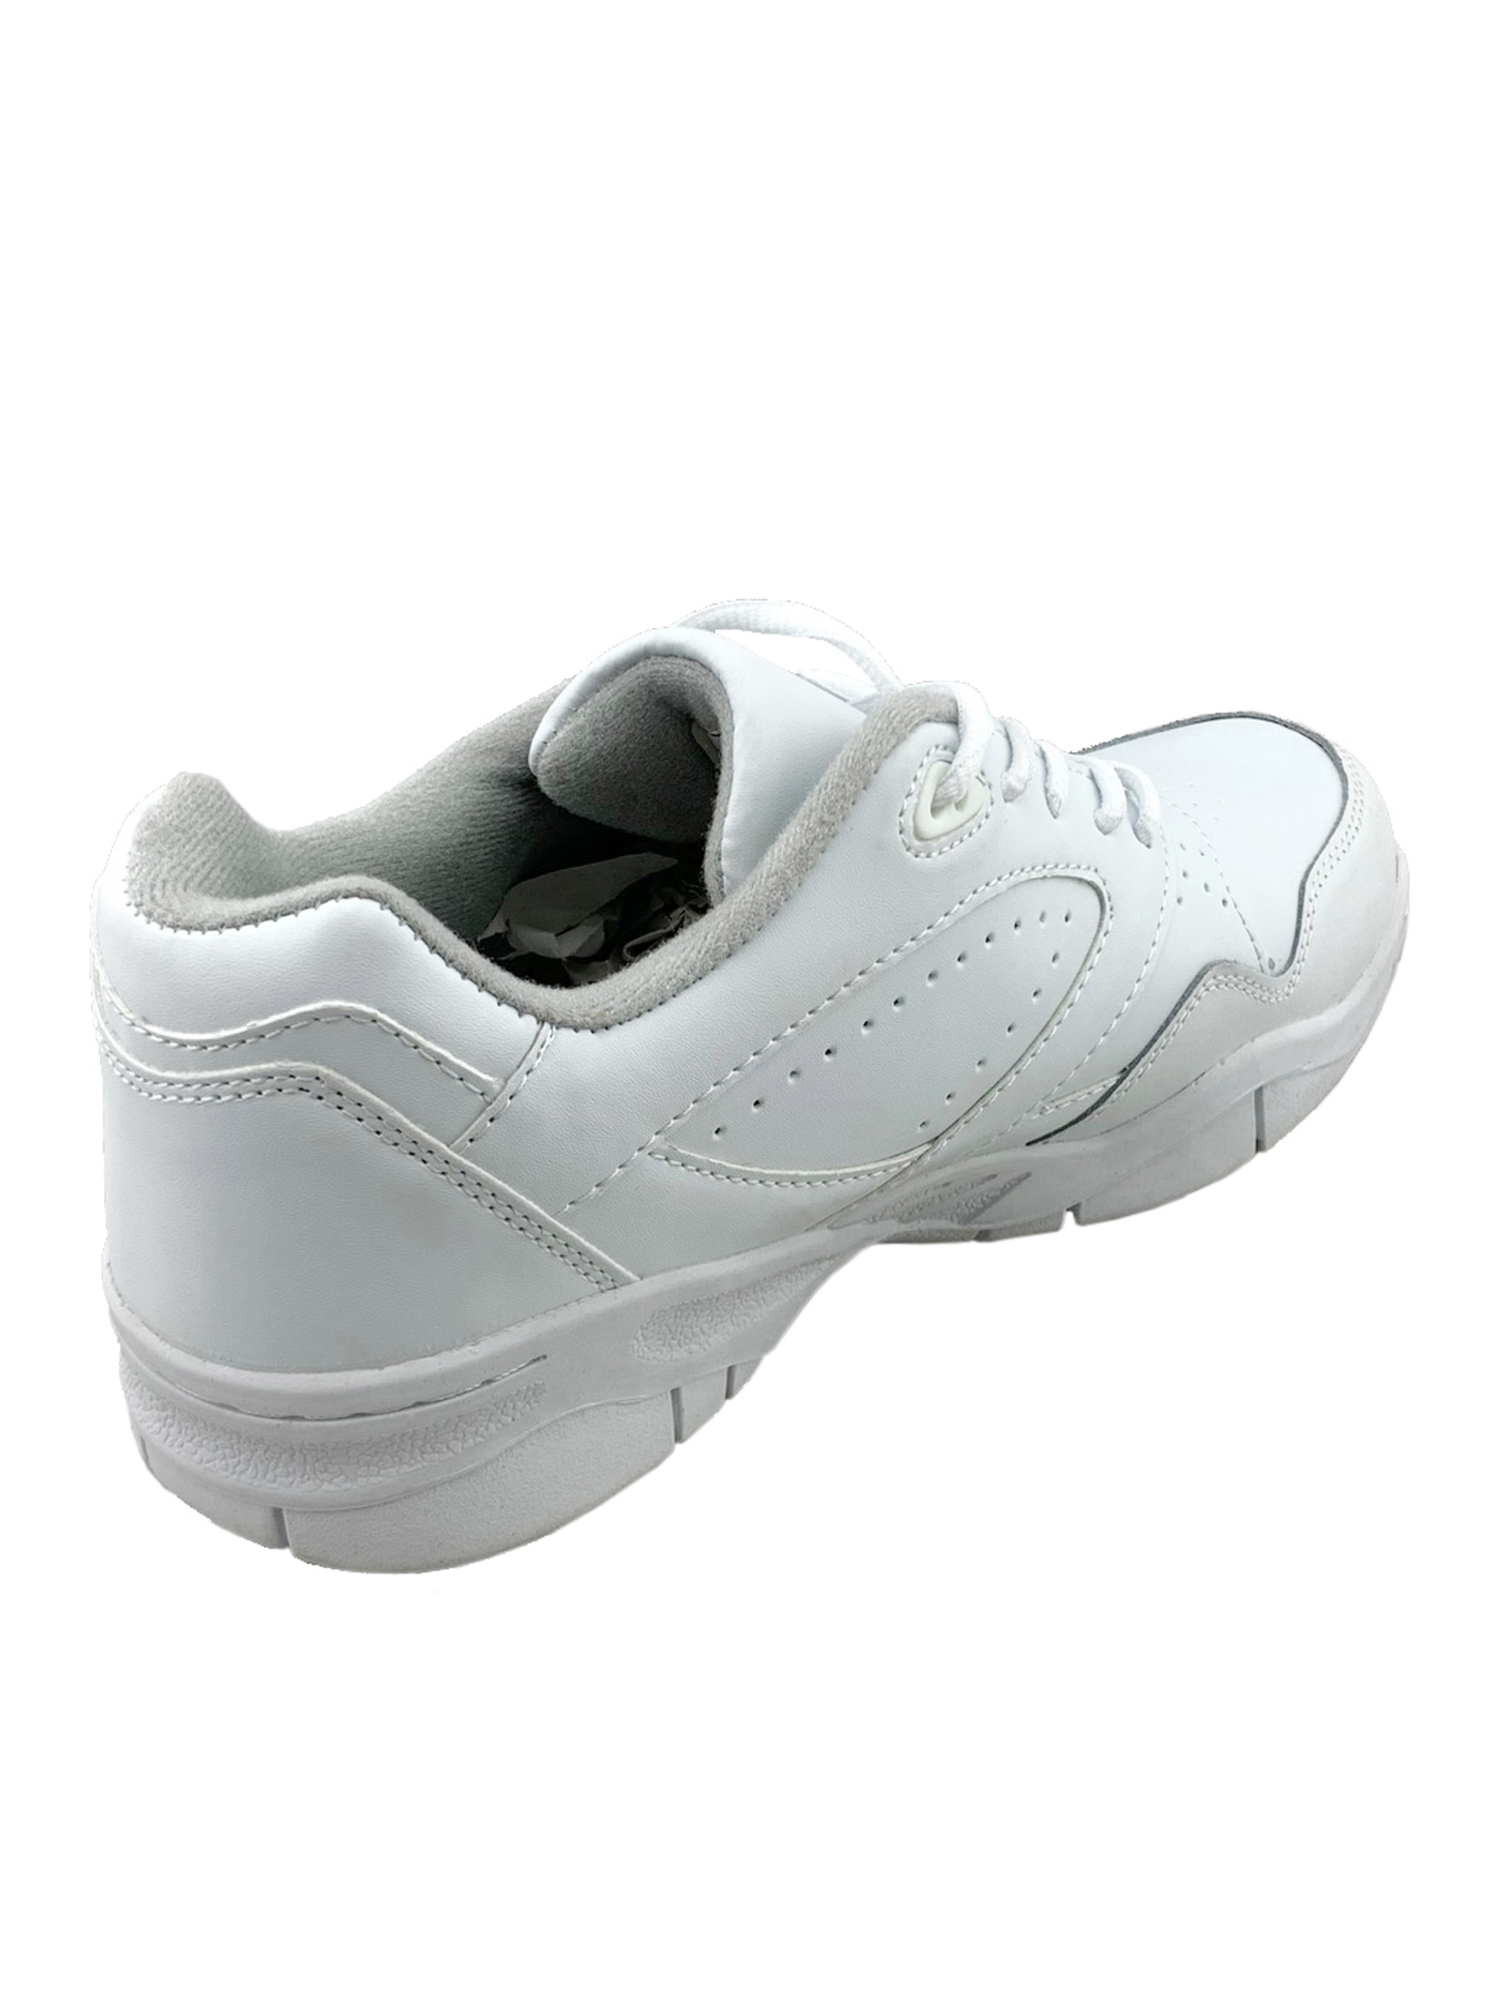 Tanleewa Men's Leather White Sports Shoes Lightweight Sneakers Breathable Casual Shoe Size 16 - image 5 of 5